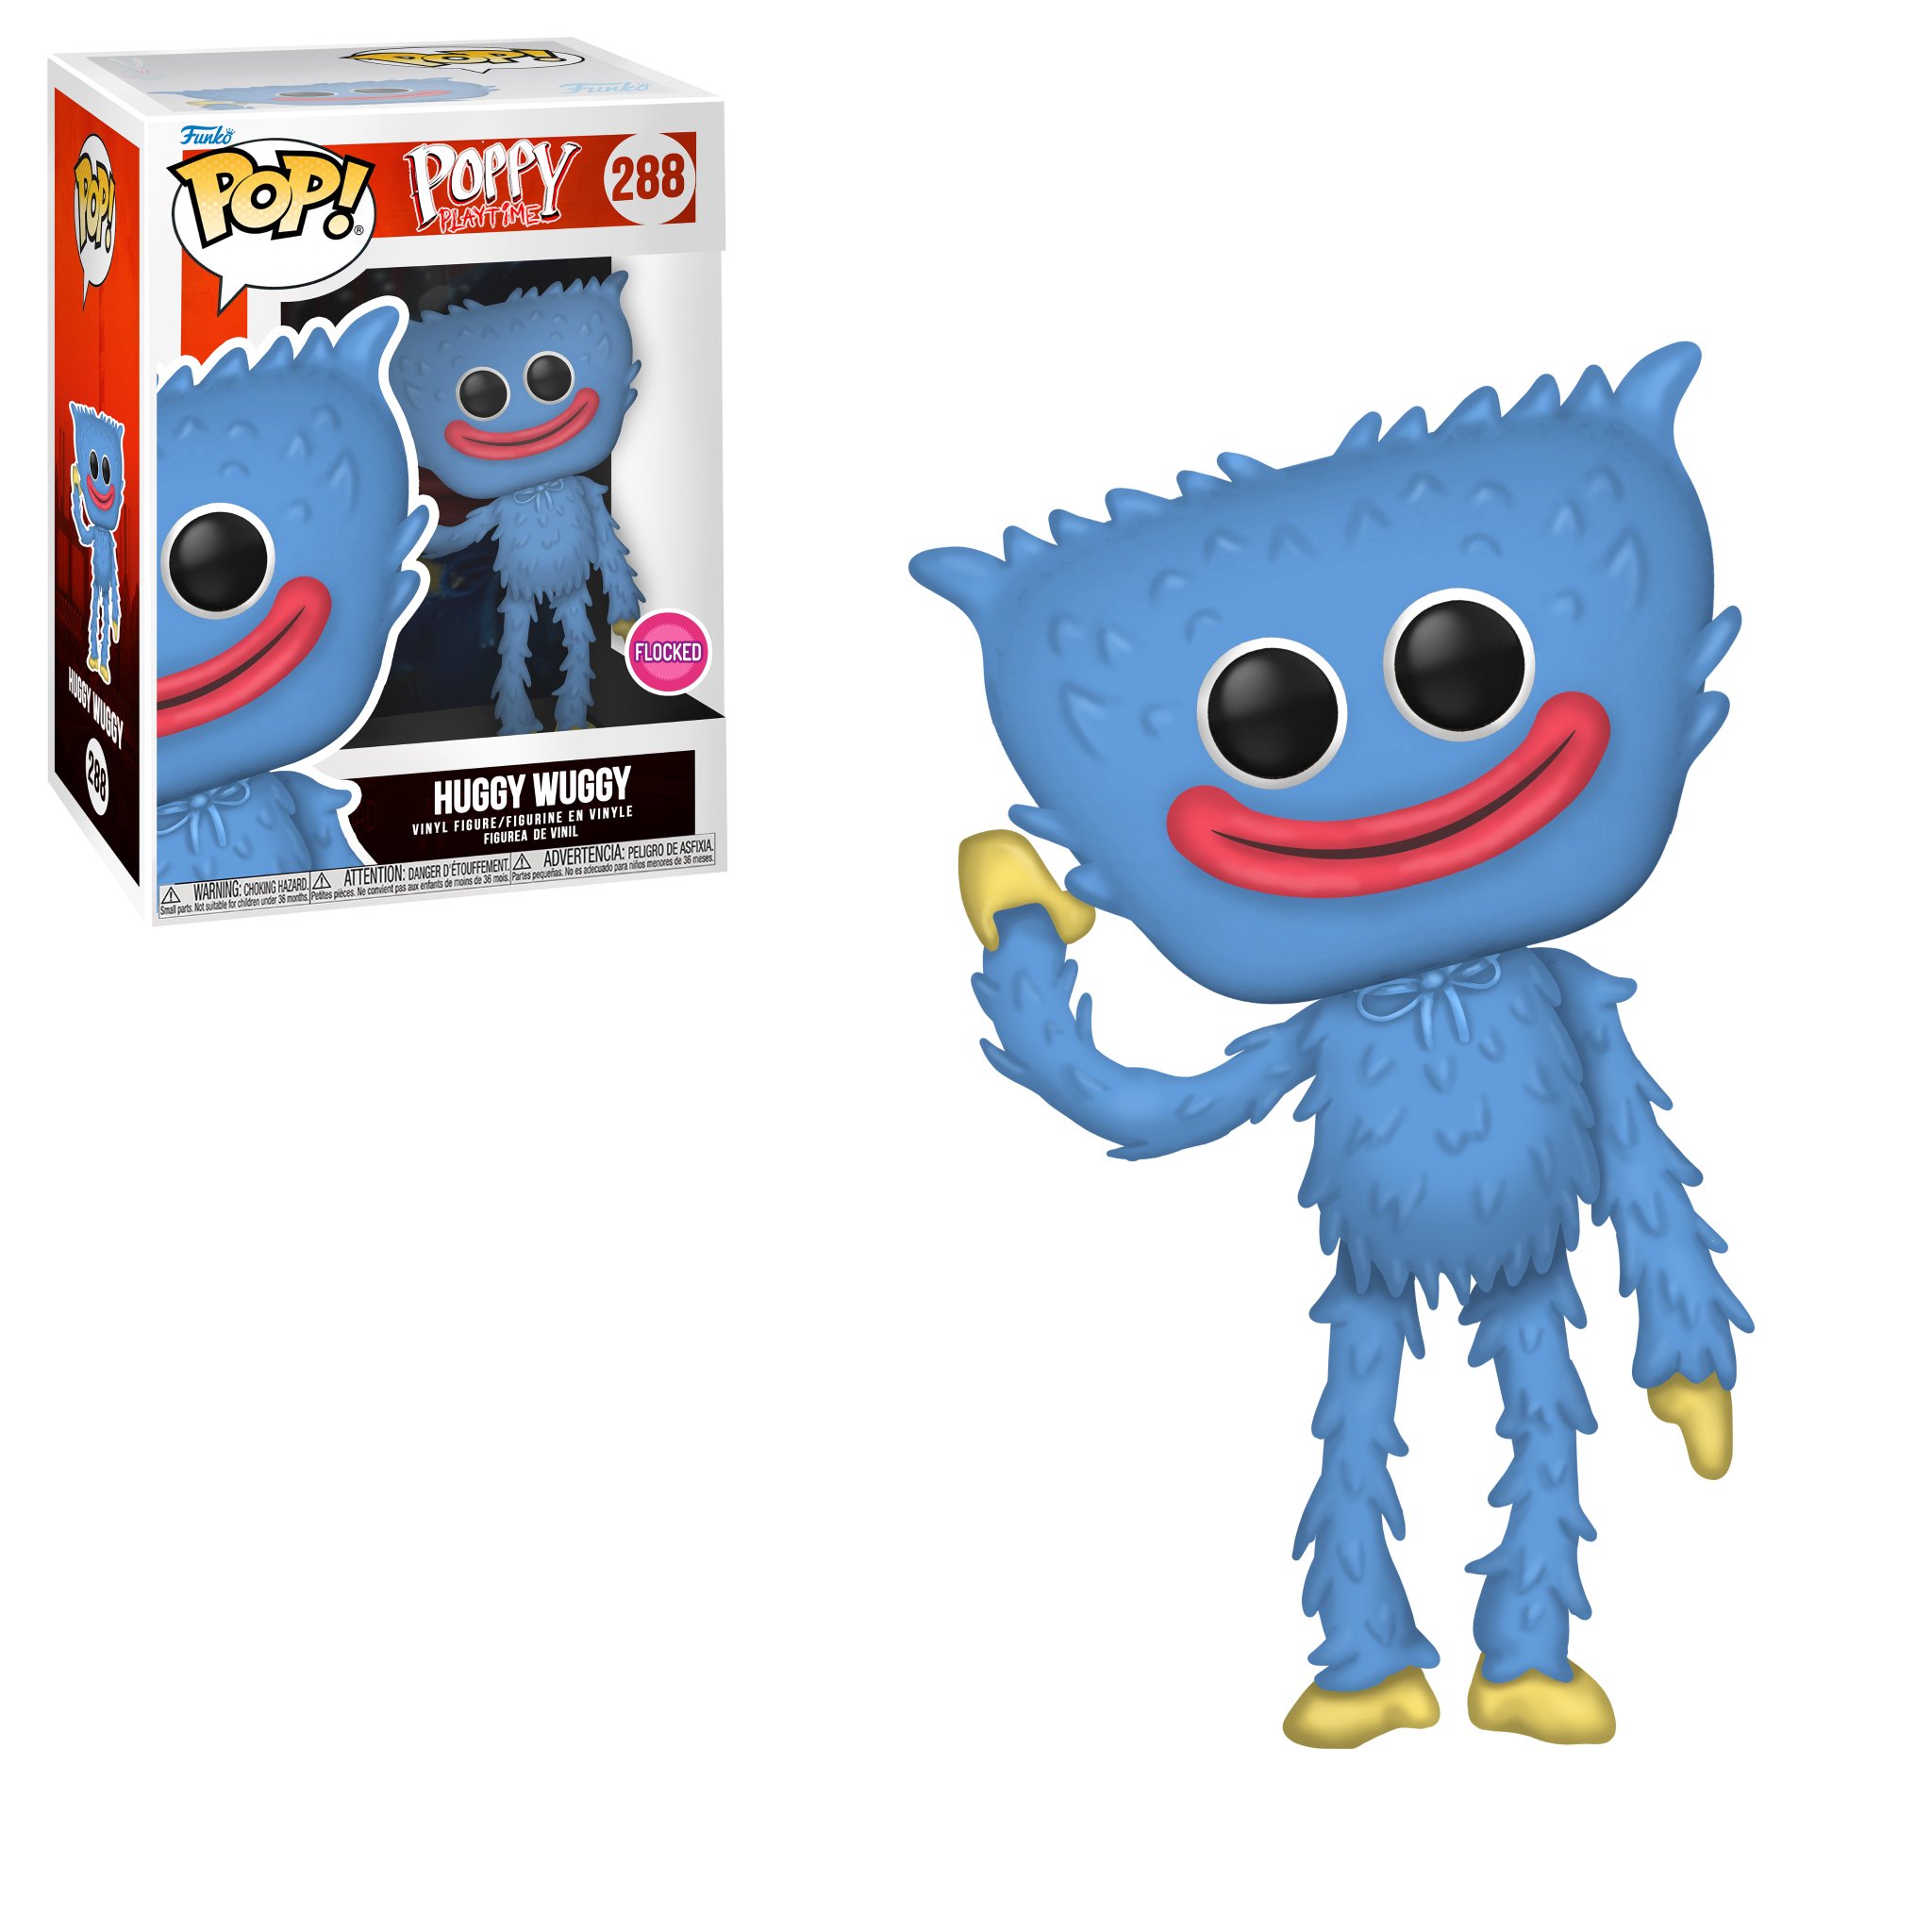 Twitter 上的K's Koncepts："#288 Funko Pop! Box &amp; Pop Concept: Huggy Wuggy  (Poppy Playtime) #poppyplaytime #huggywuggy #playtimeco #funko #funkopopart  #funkopop #funkopopconcept #funkopopconceptart #funkofanatic  #ksfunkoconcepts https://t.co ...